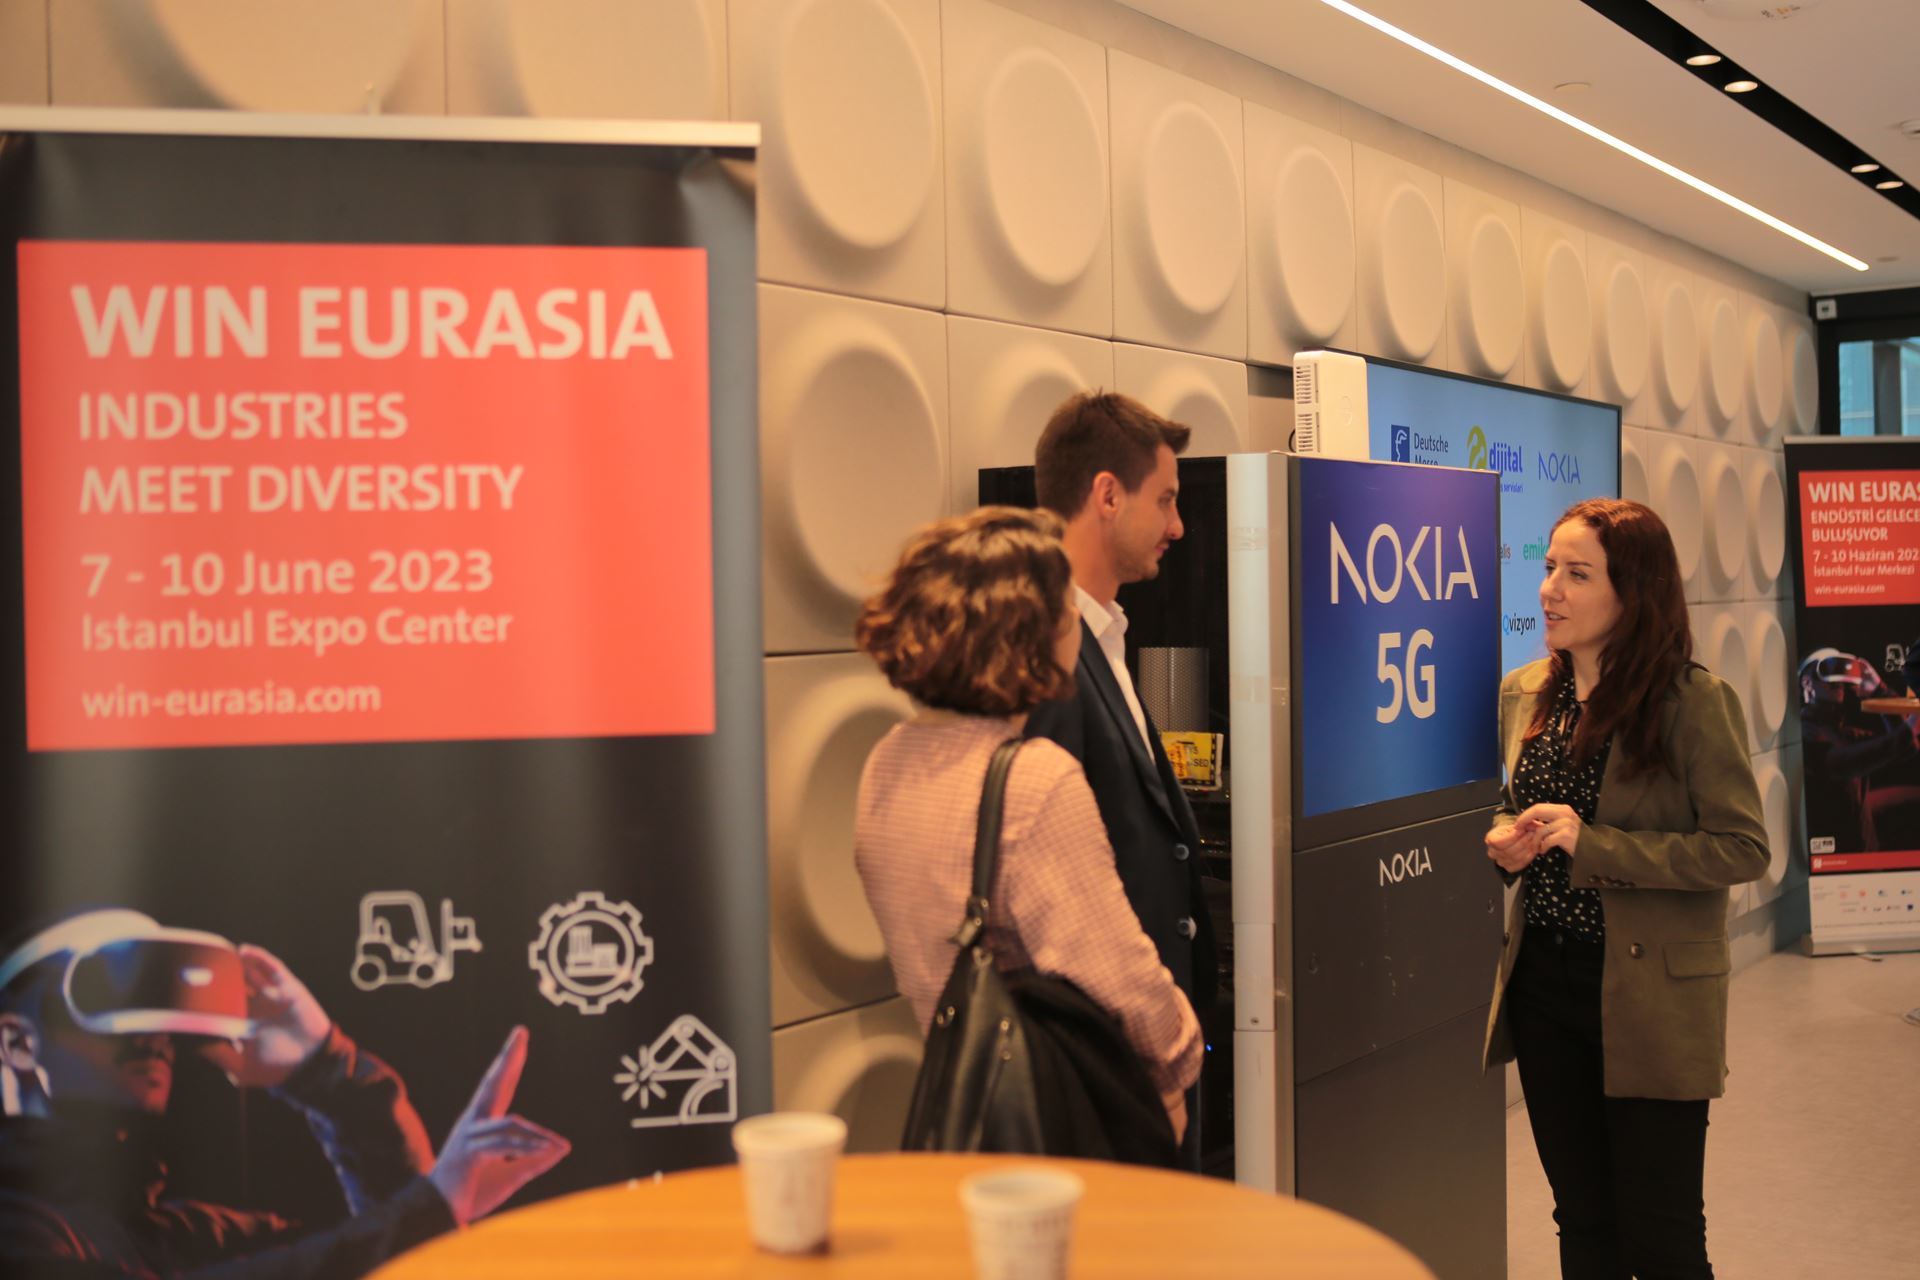 WIN EURASIA is preparing to give an experience of 'Industry 5.0: Factory of the Future'